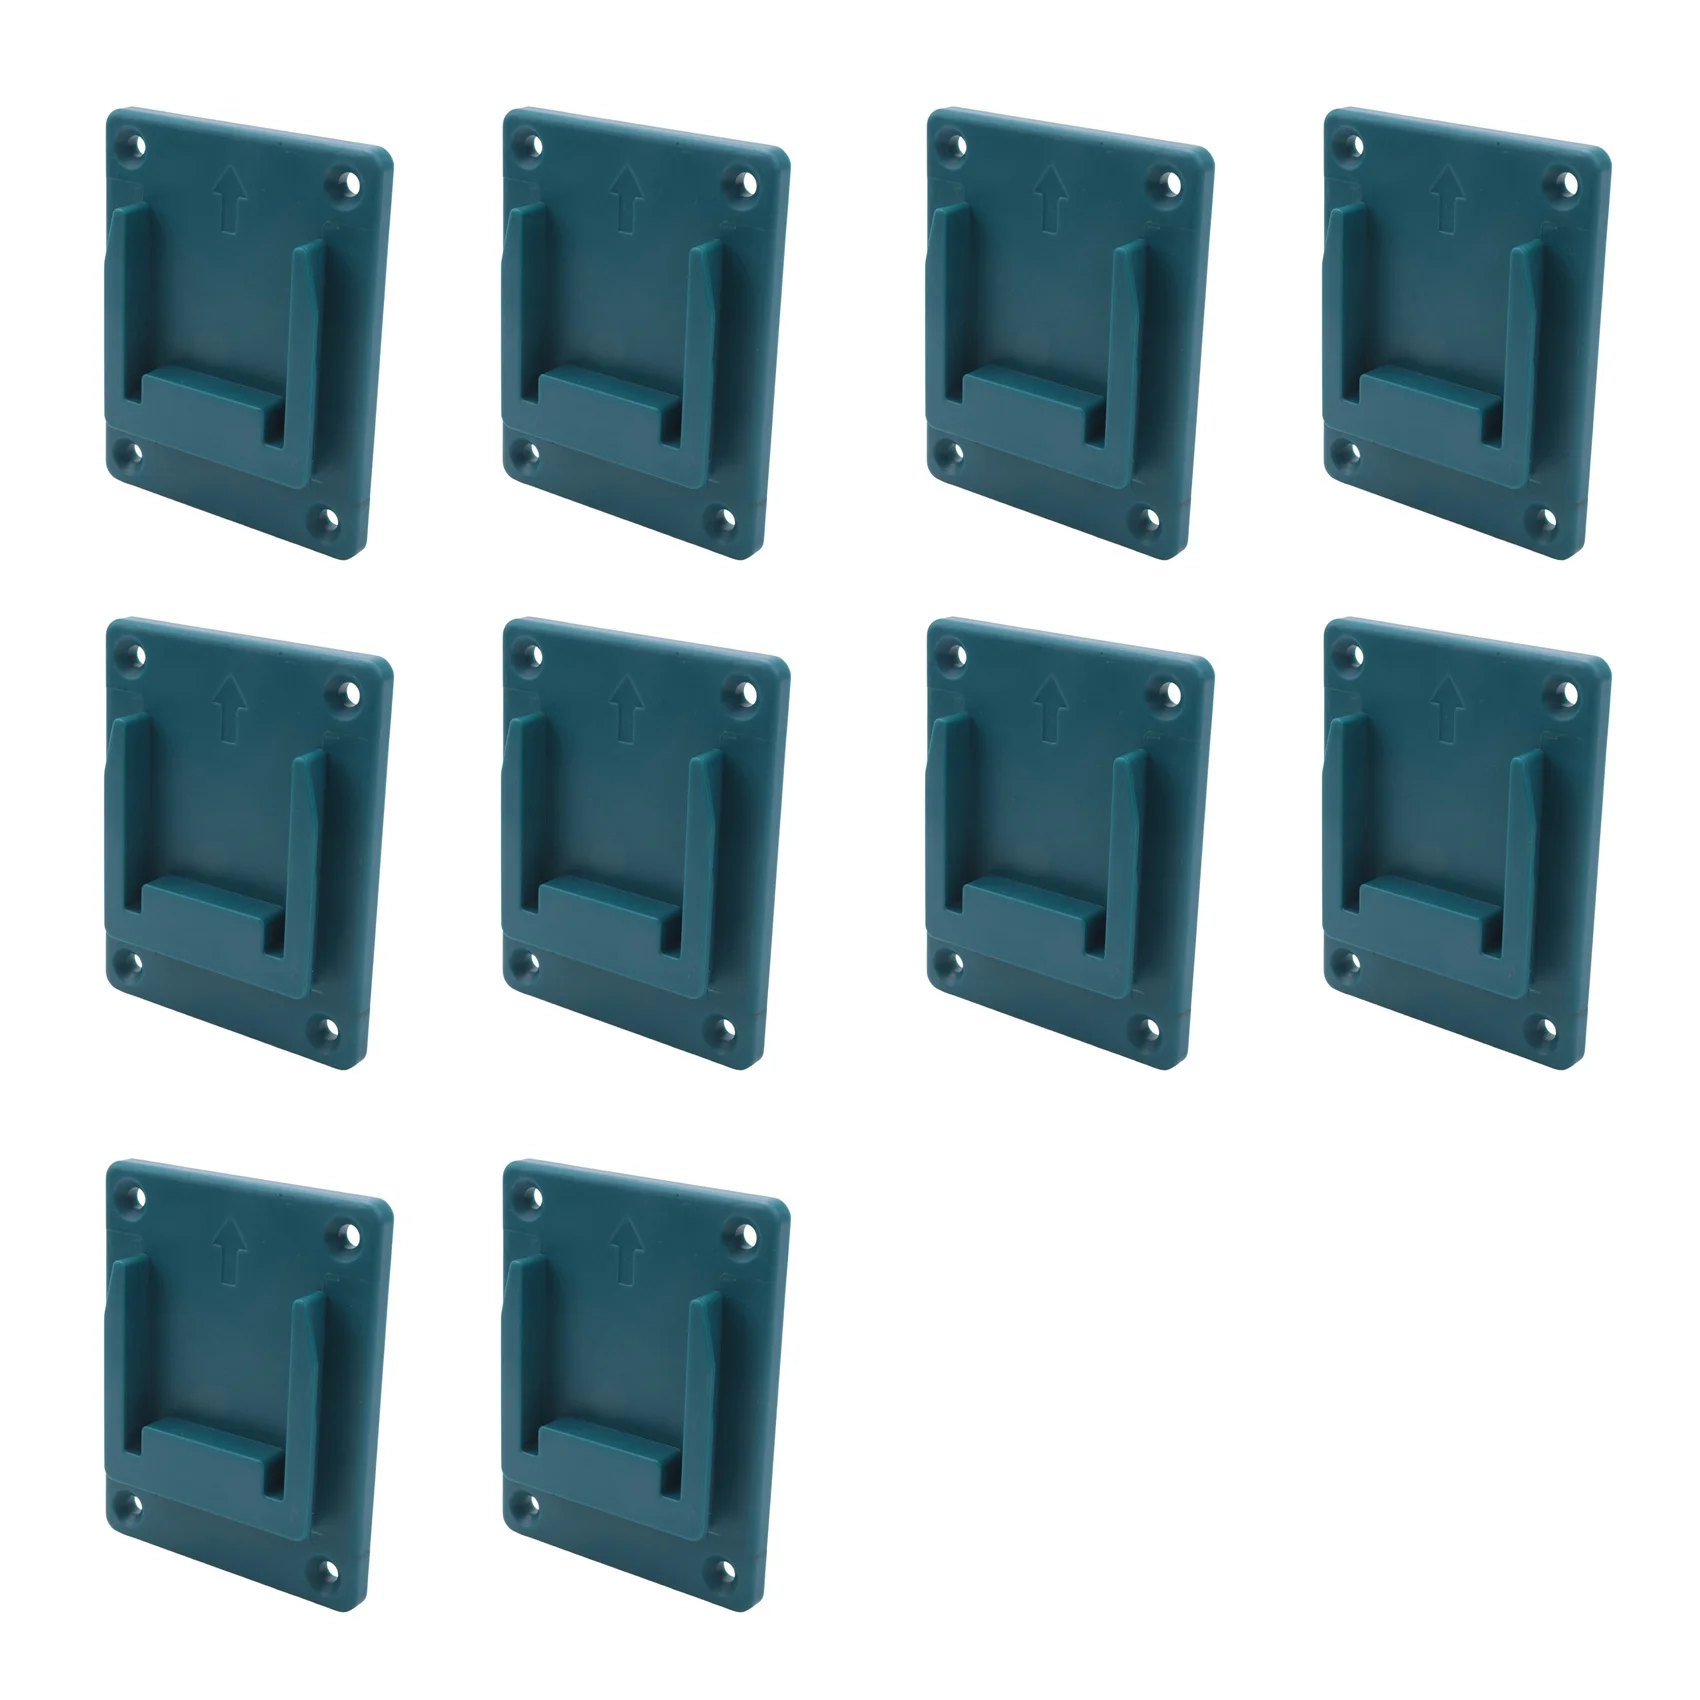 

10Pcs Machine Holder Wall Mount Storage Bracket Fixing Devices for Makita 18V Electric Tool Battery Tools Blue